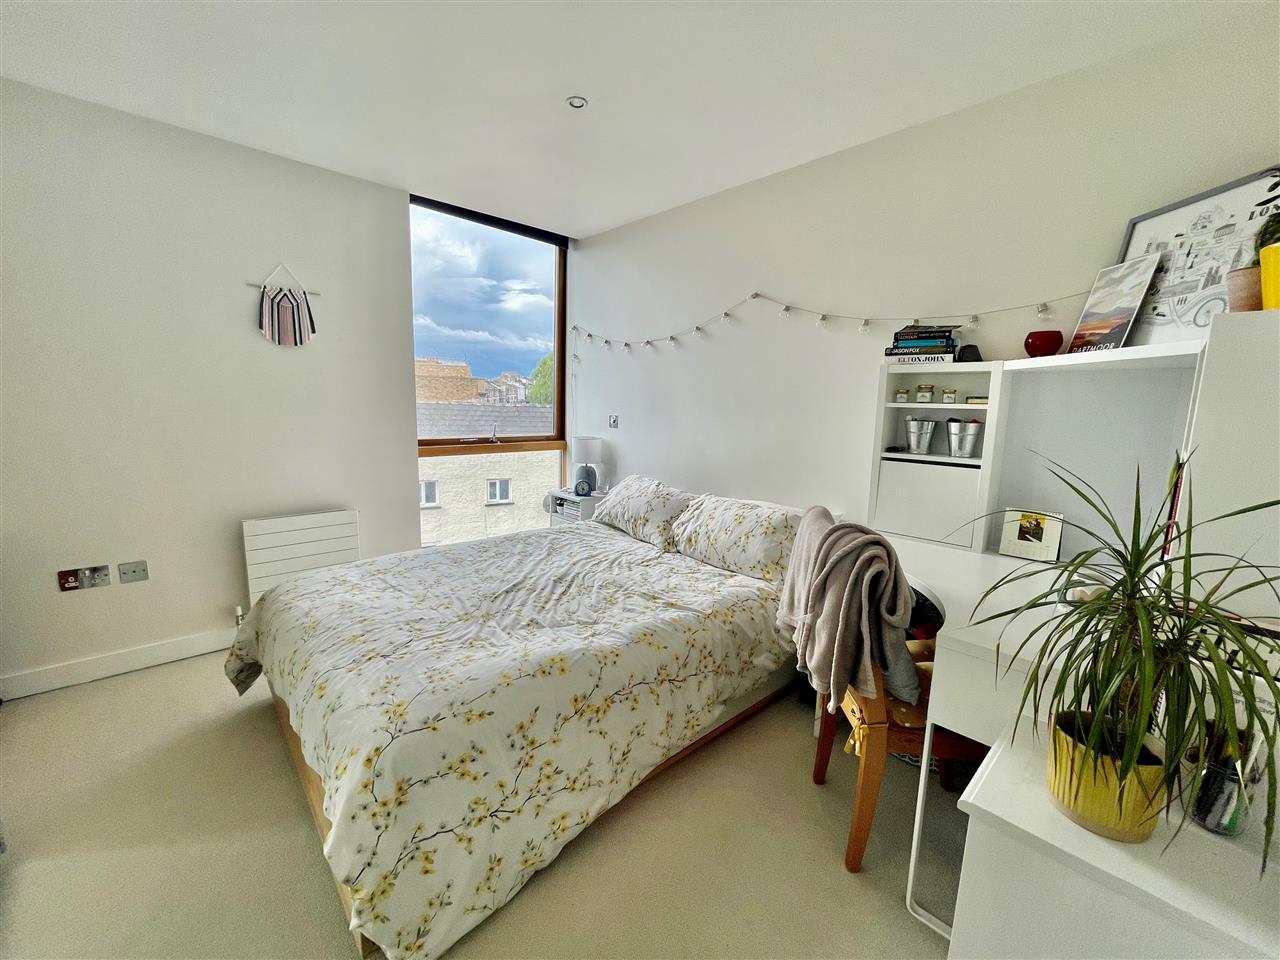 1 bed flat to rent in Highgate Road - Property Image 1